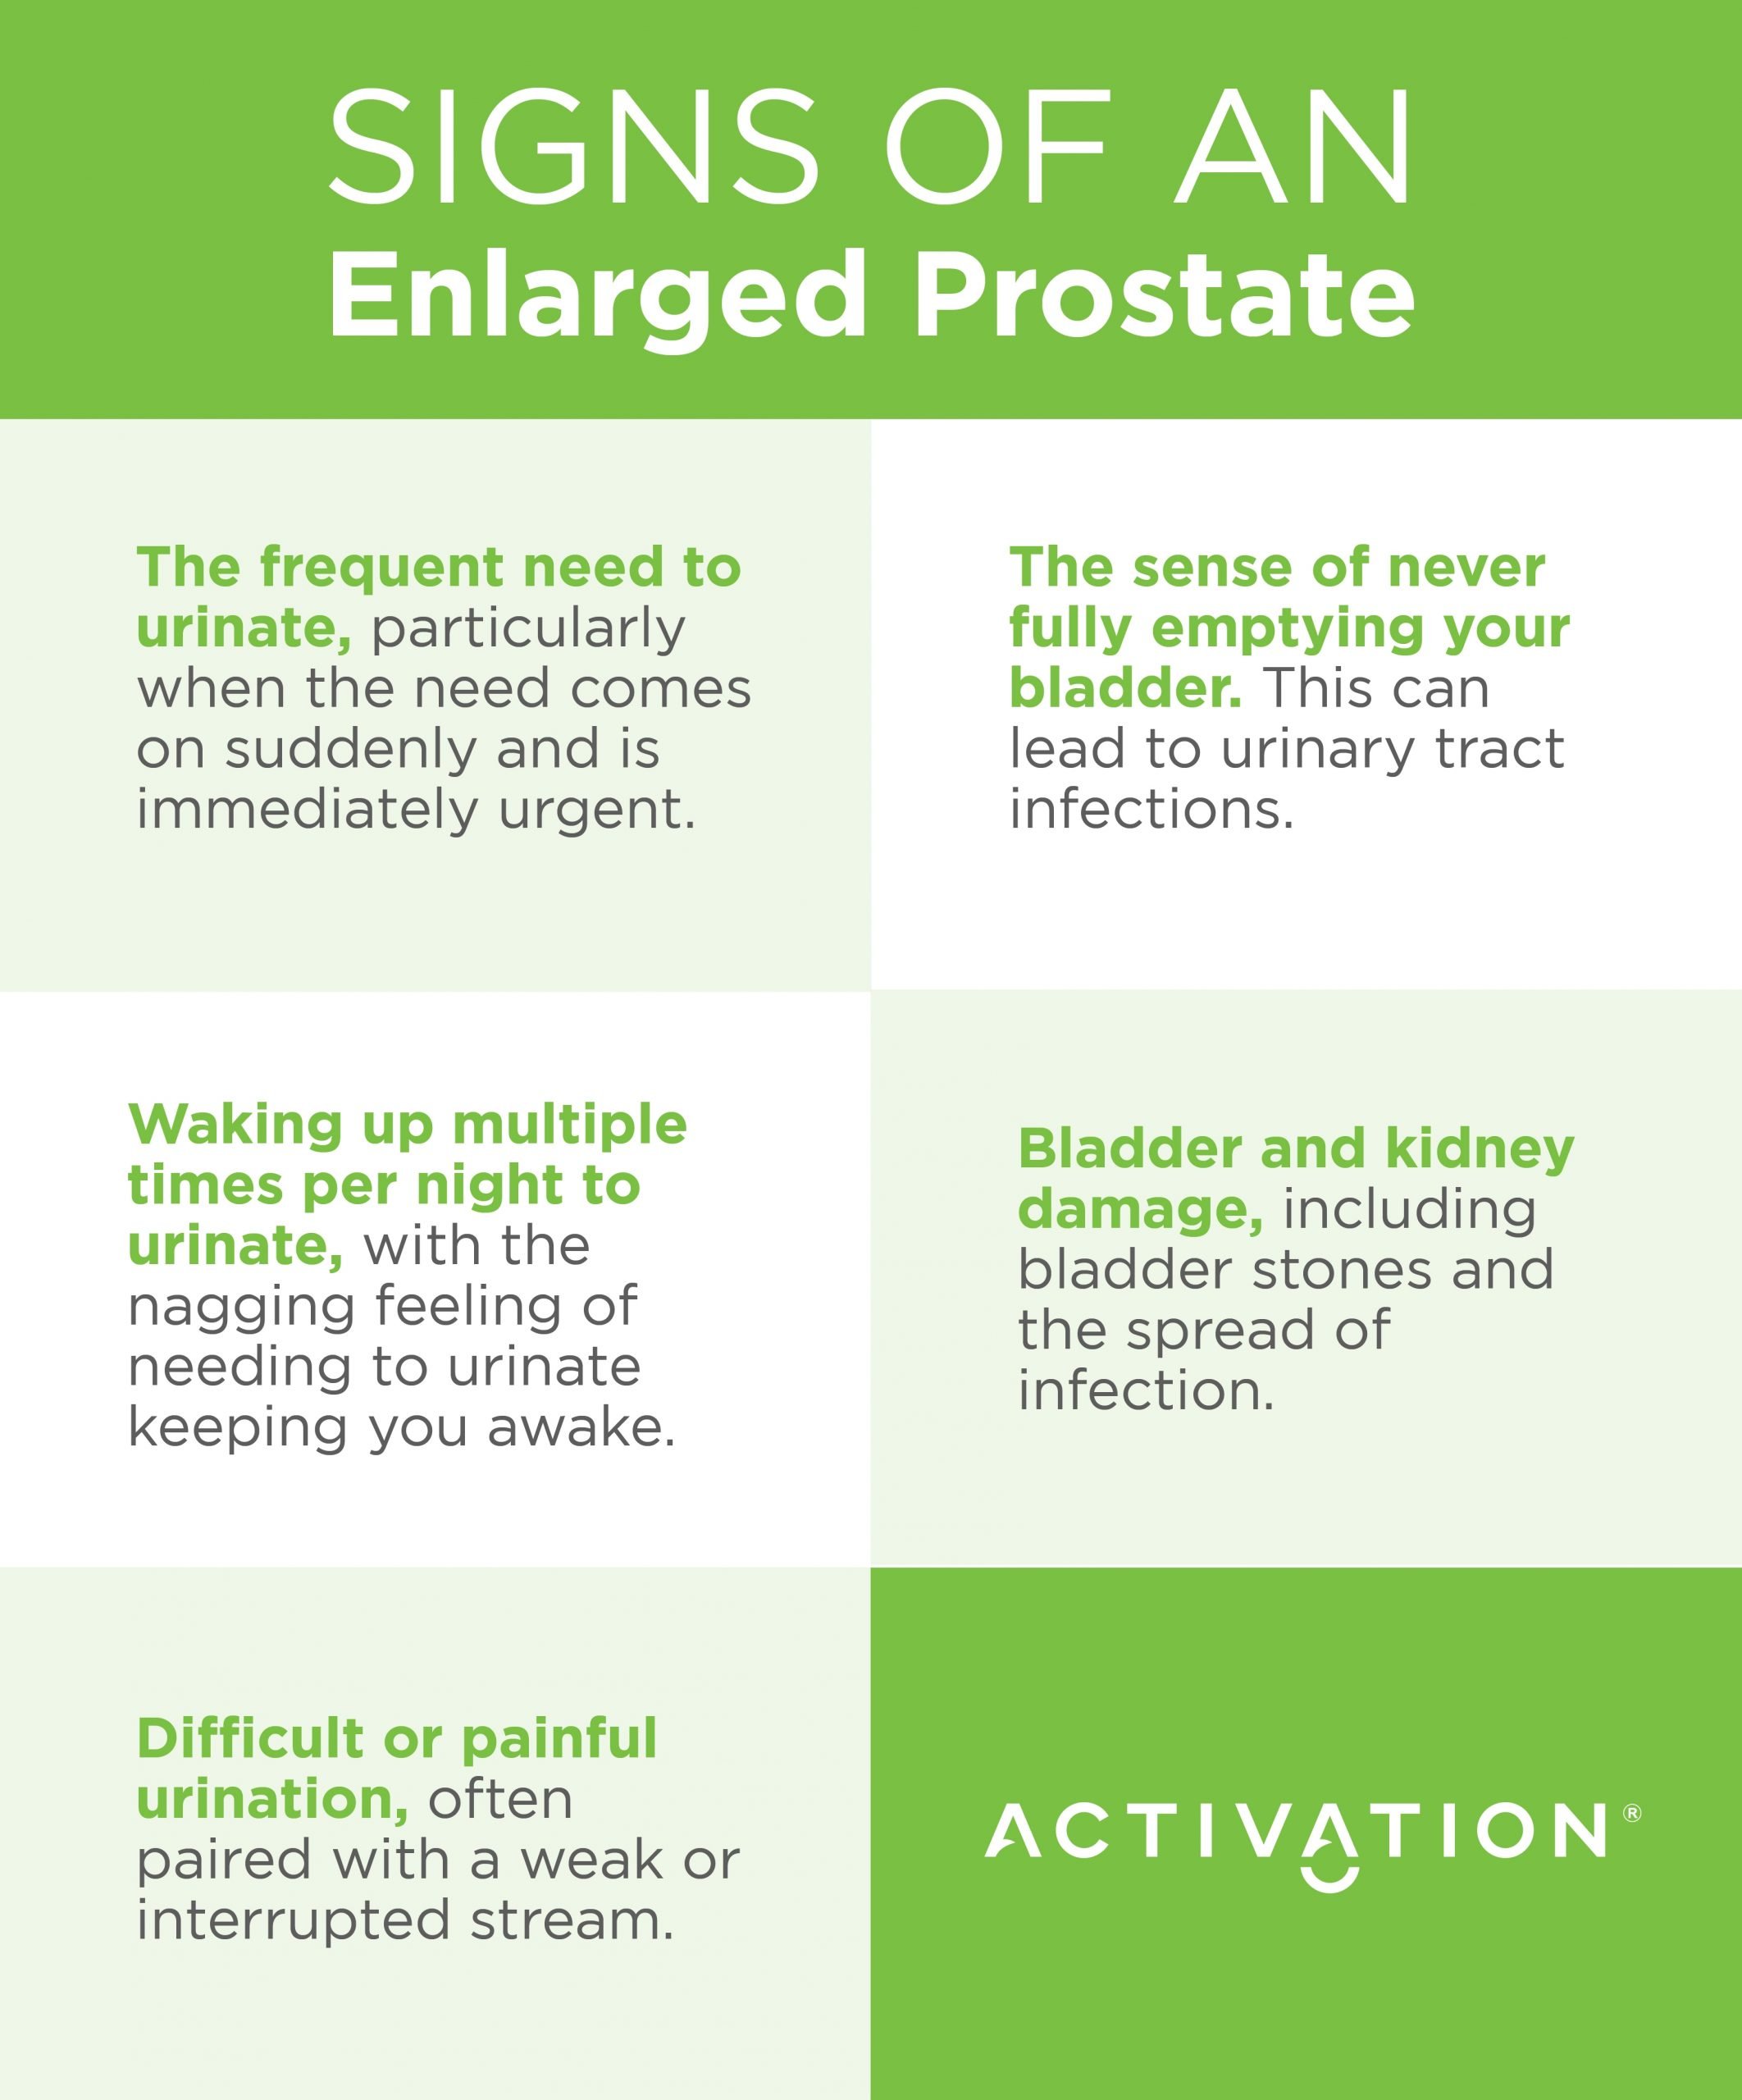 Signs of an Enlarged Prostate